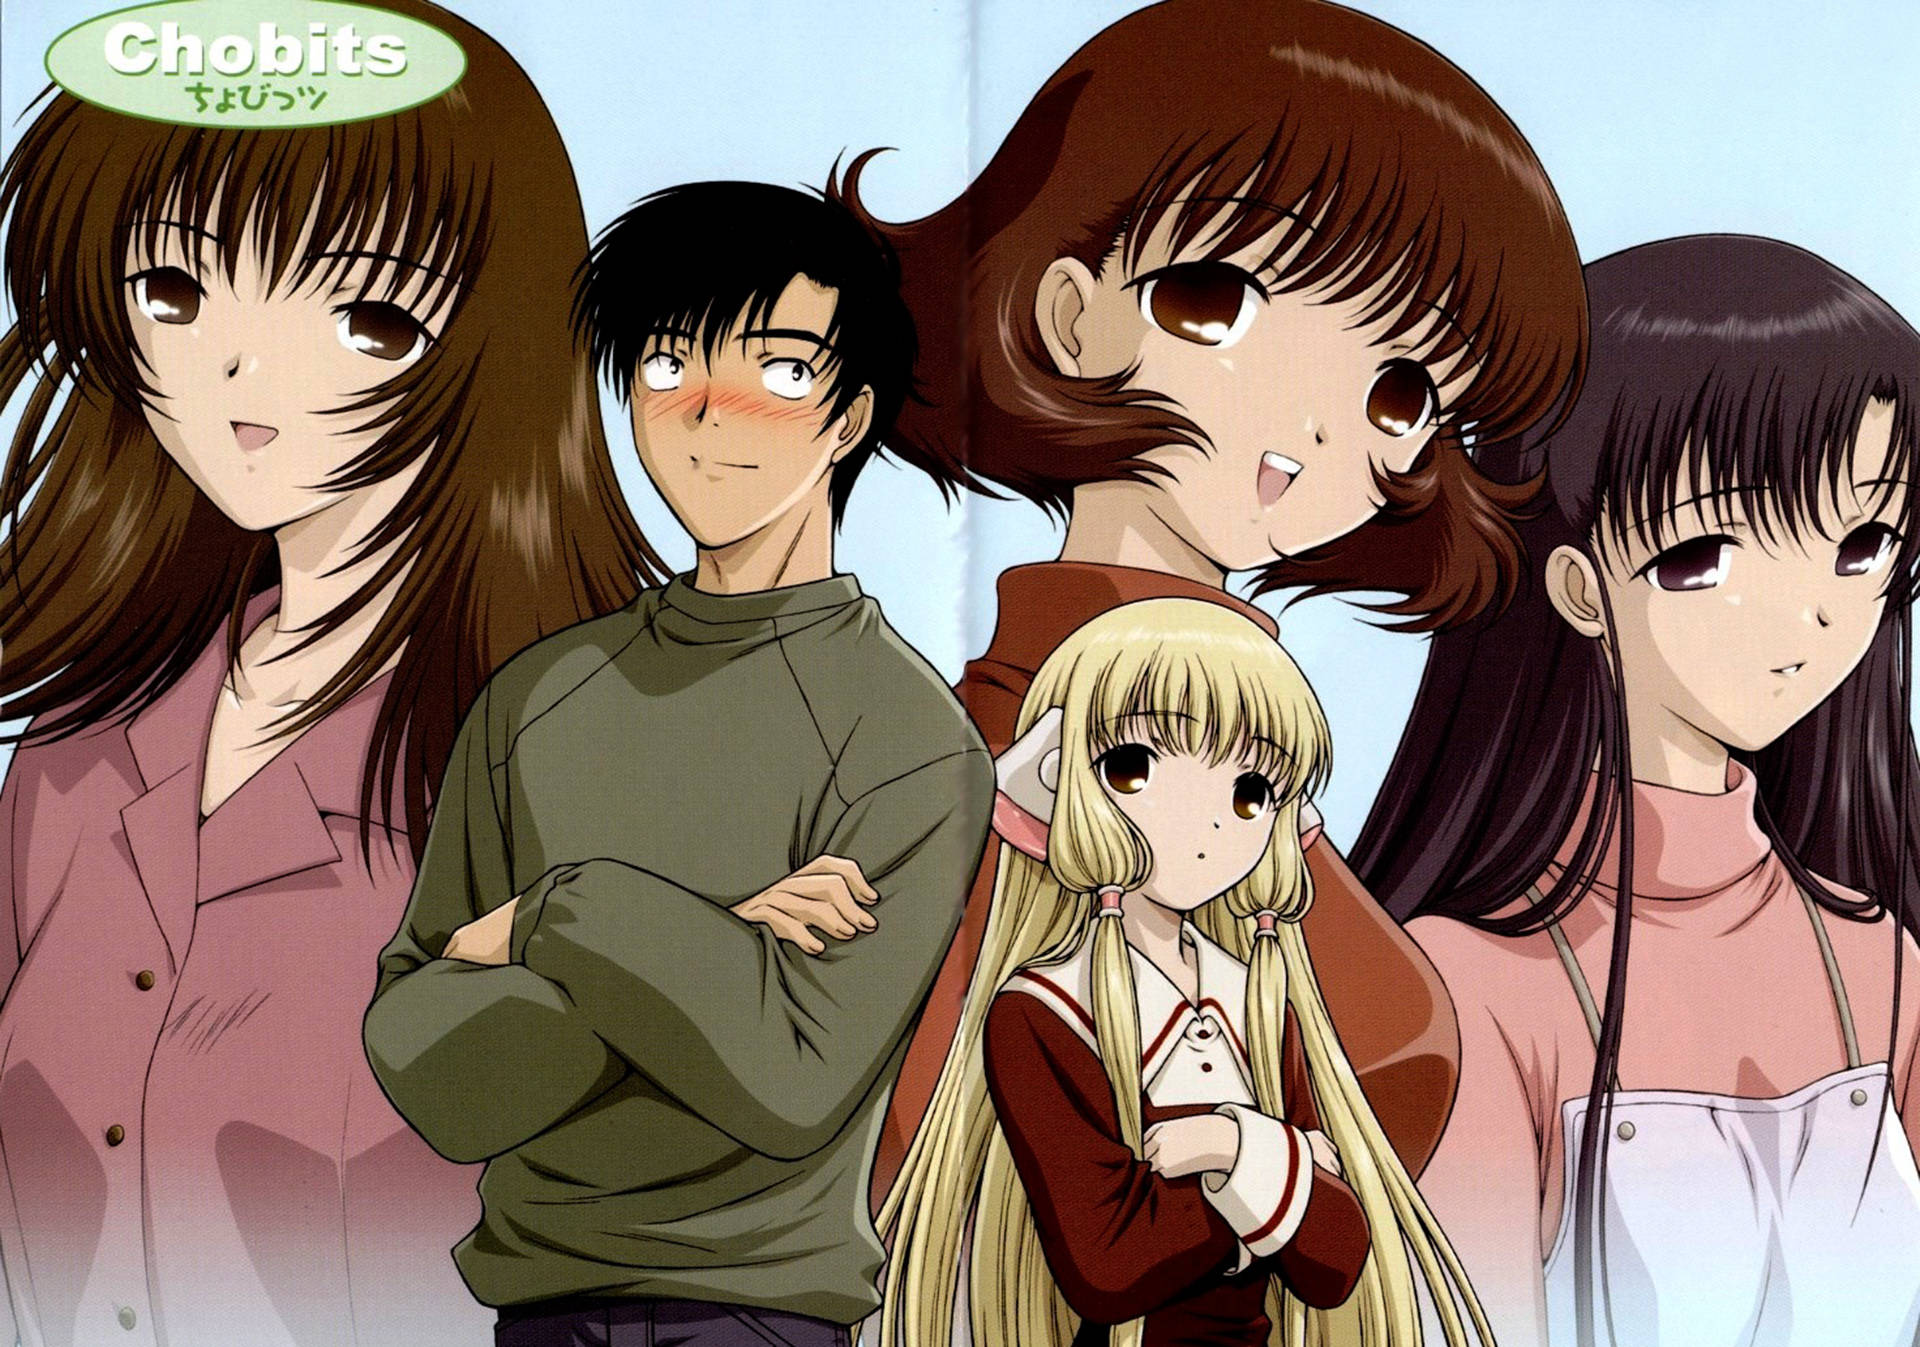 Free Chobits Wallpaper Downloads, [100+] Chobits Wallpapers for FREE |  